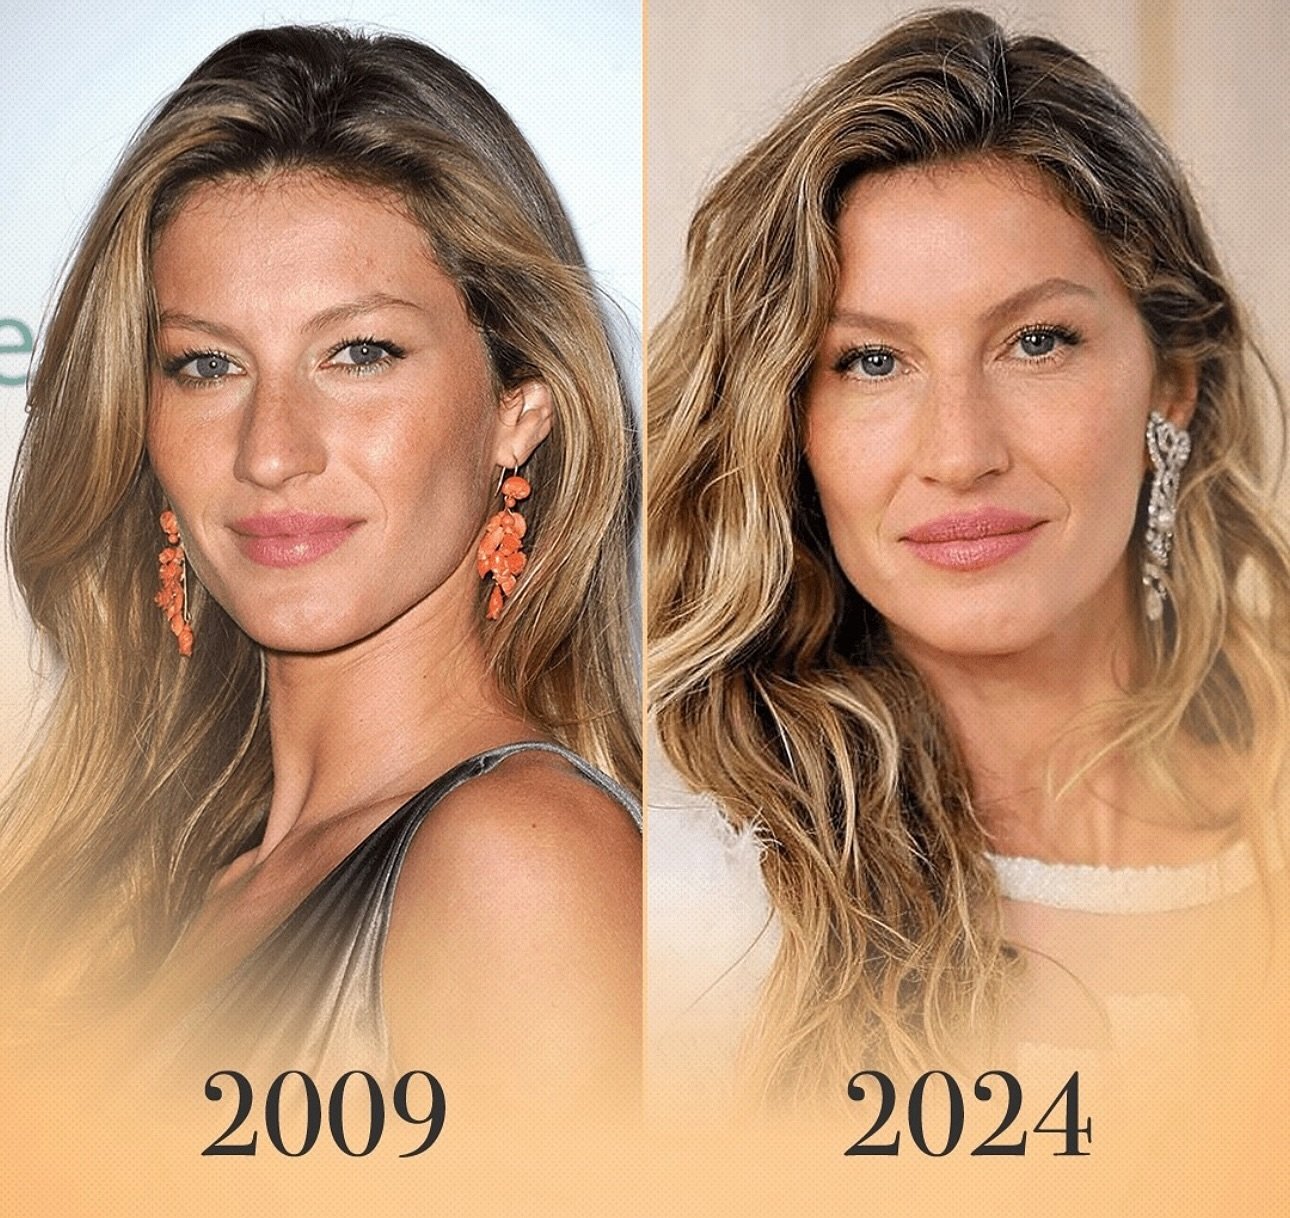 Gisele B&uuml;ndchen hasn&rsquo;t aged a day in 15 years! What do you think her top beauty secret is? ✨

Services we offer:
▪️ Fillers 
▪️ Anti-aging treatments
▪️ Facial Balancing
▪️ Laser Hair Removal
▪️ Skin Rejuvenation
▪️ Morpheus8 for face and 